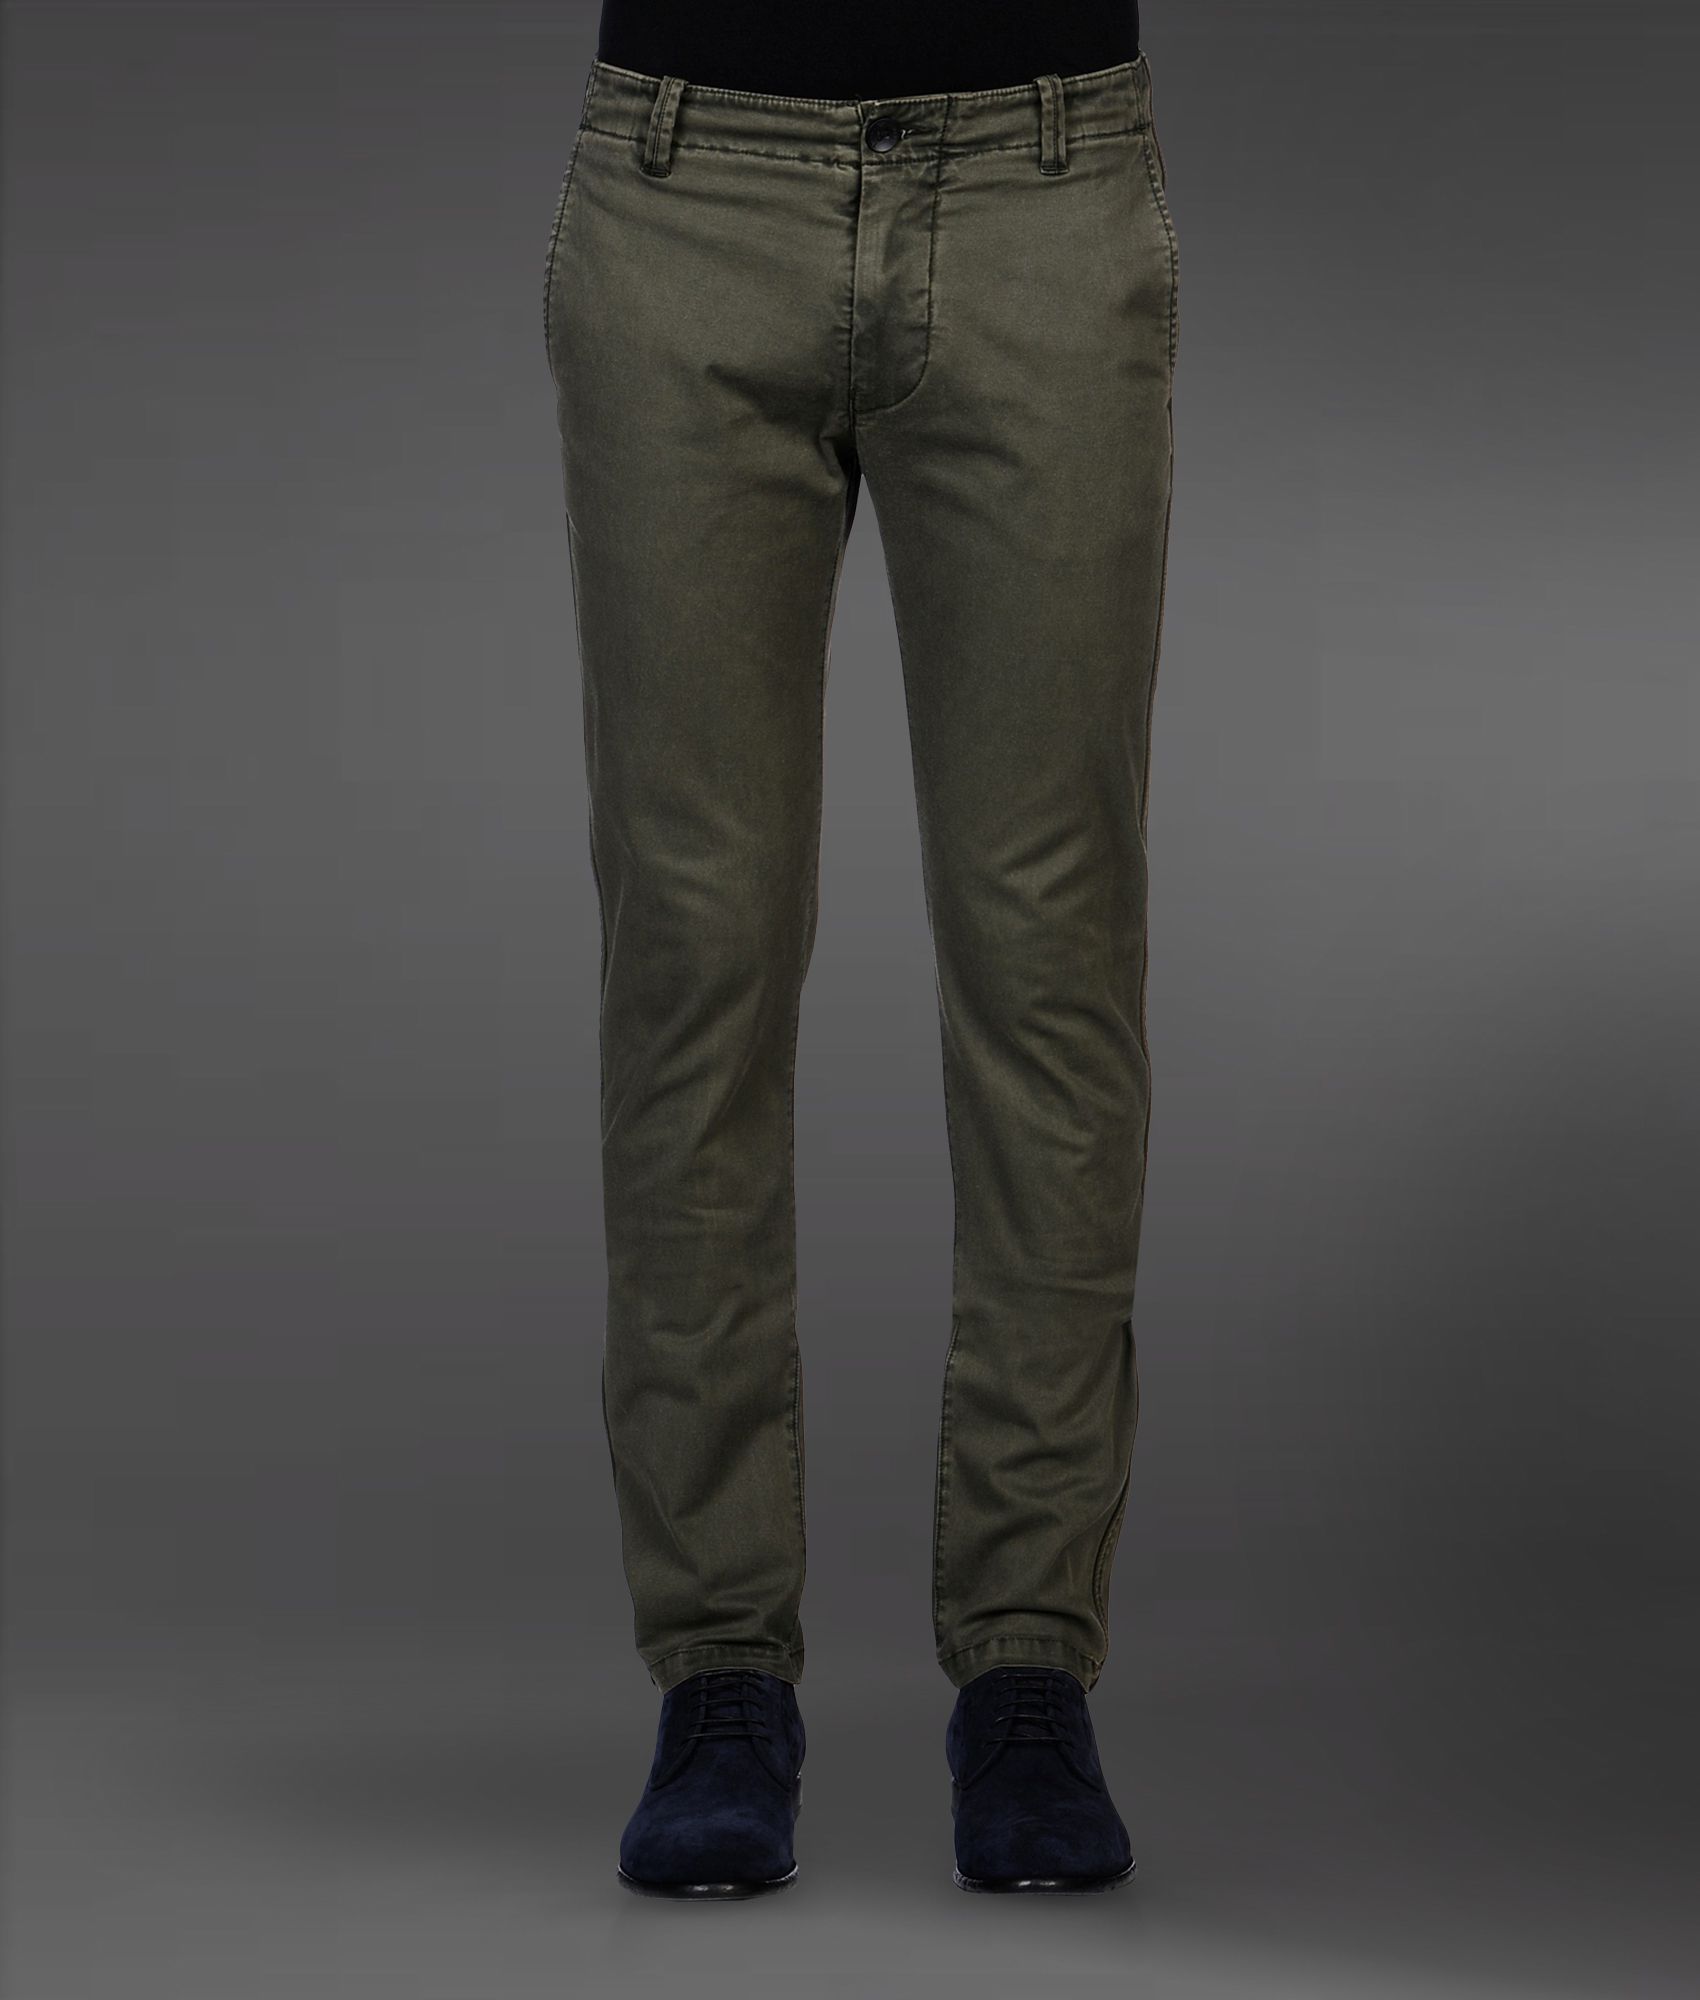 Emporio Armani Chinos in Military Green (Green) for Men - Lyst